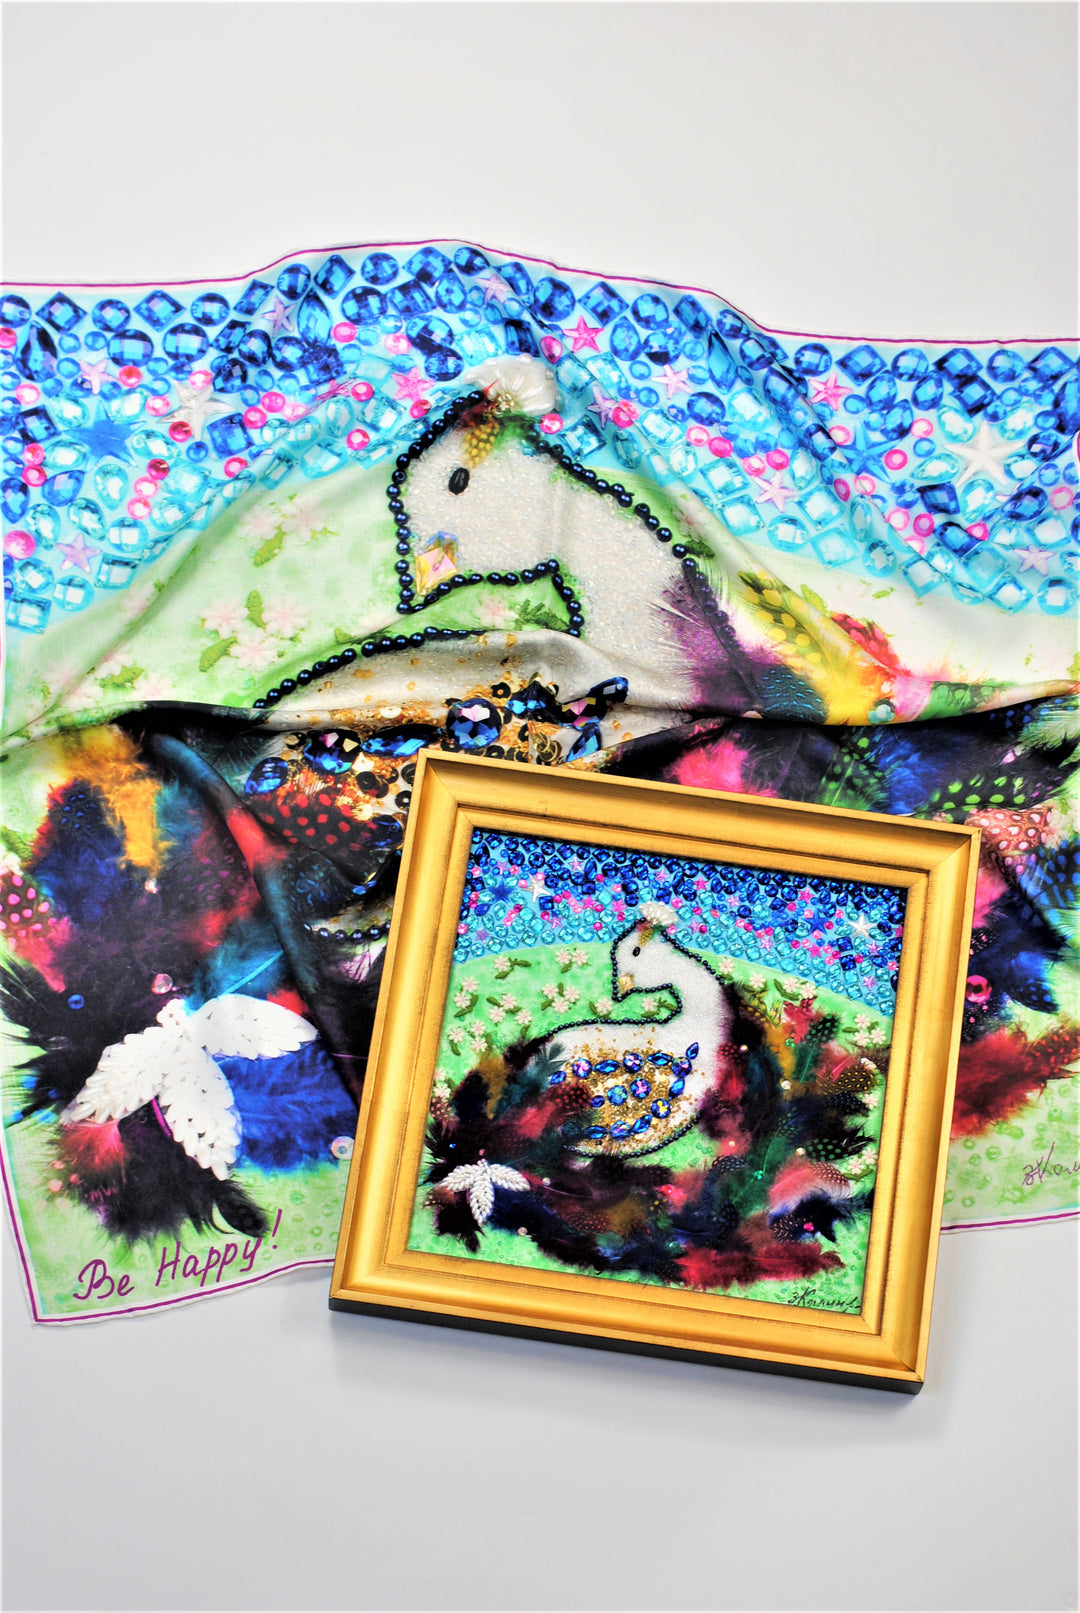 Best Gift For her BE HAPPY Wearable Art Pure Silk Scarf Bird Of happiness Bright 100% Silk Shawl by Chicago Fashion Designer Alesia Chaika